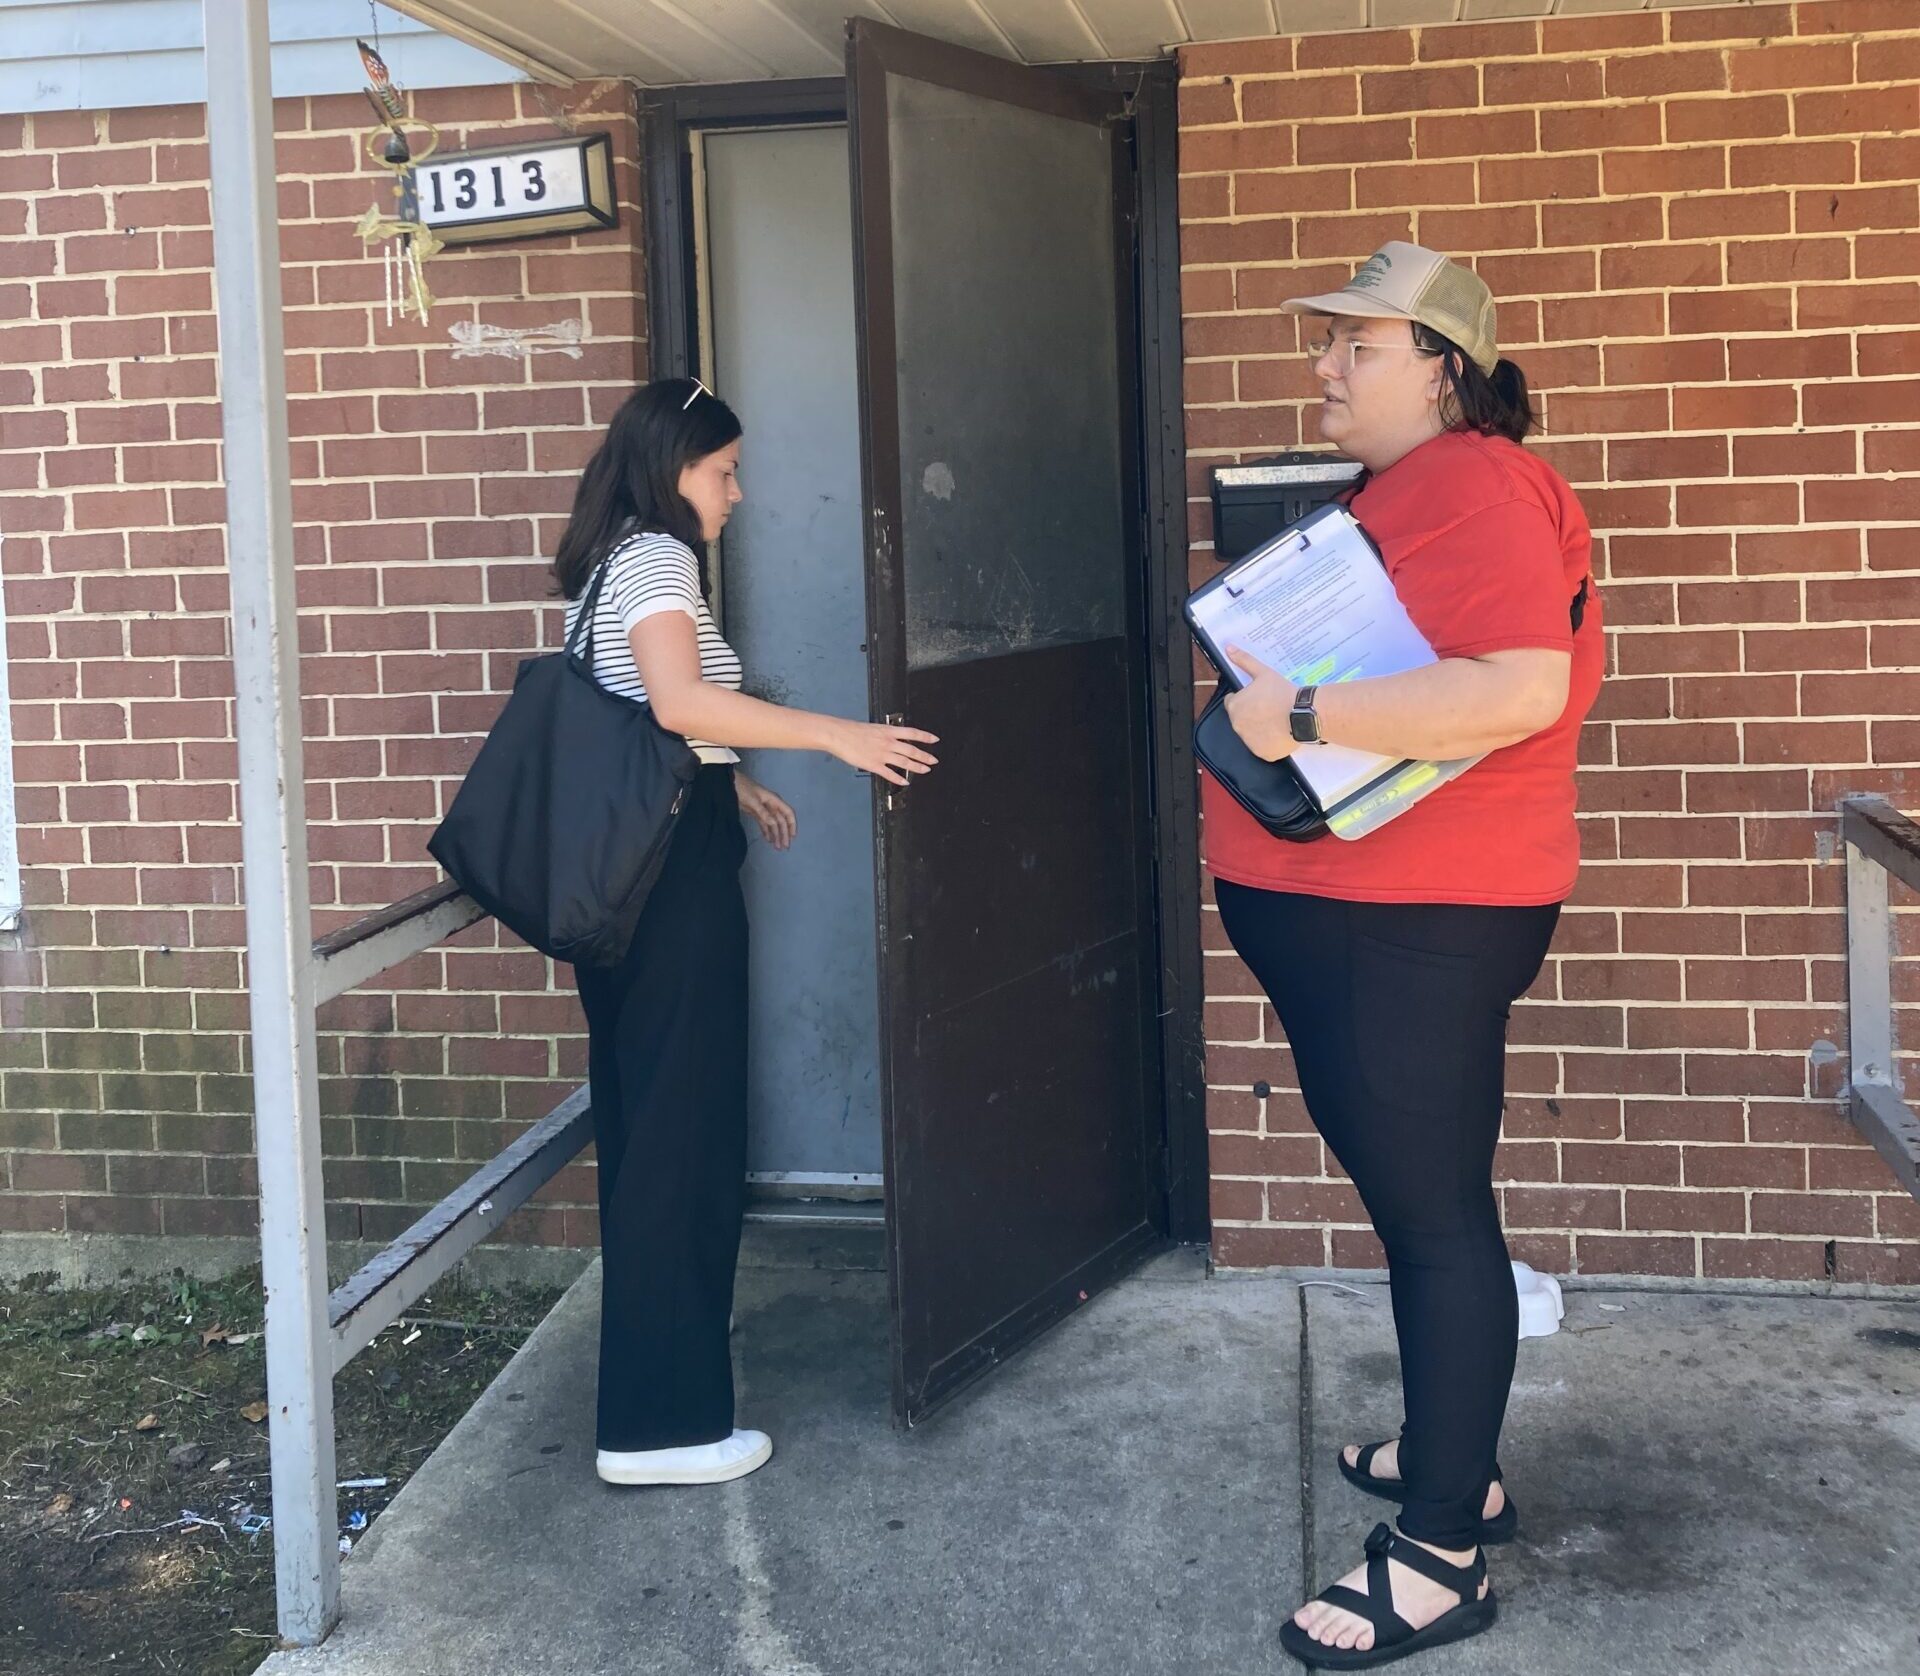 Two legal aid workers knock on a renter's door to distribute fliers.